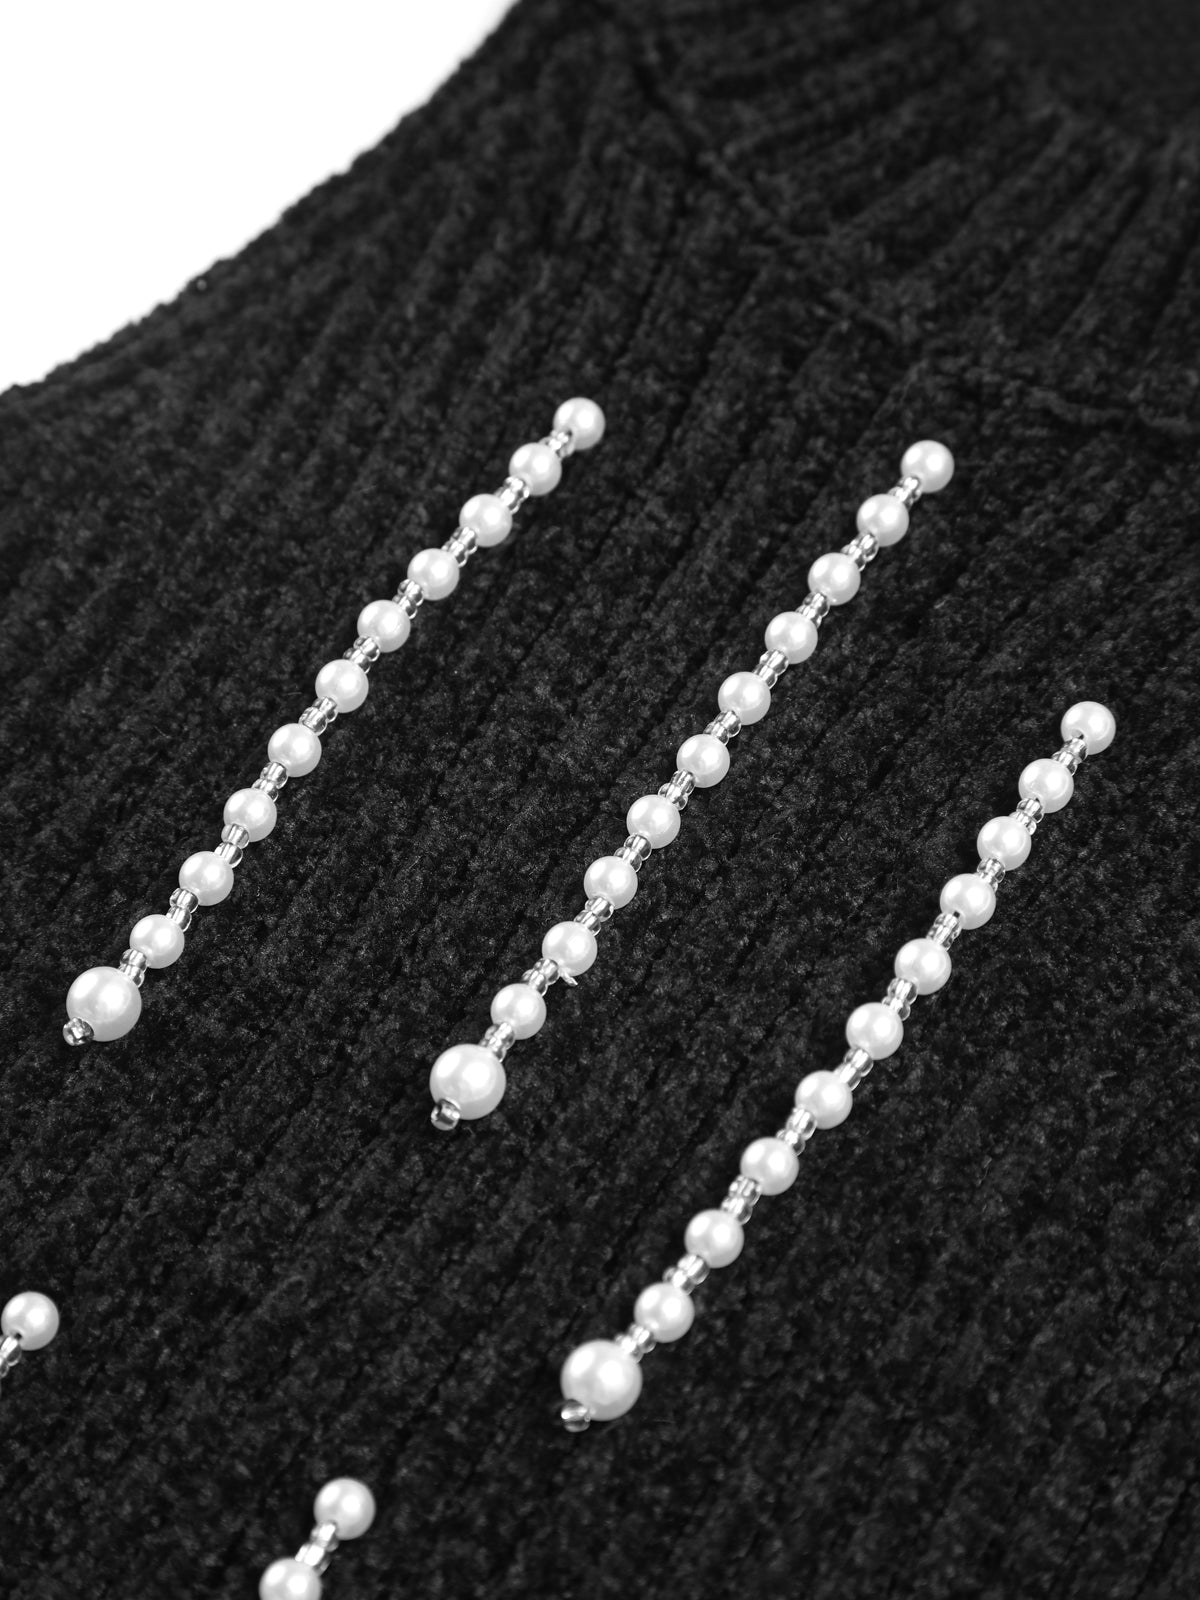 Hold My Pearls Crop Sweater Vest